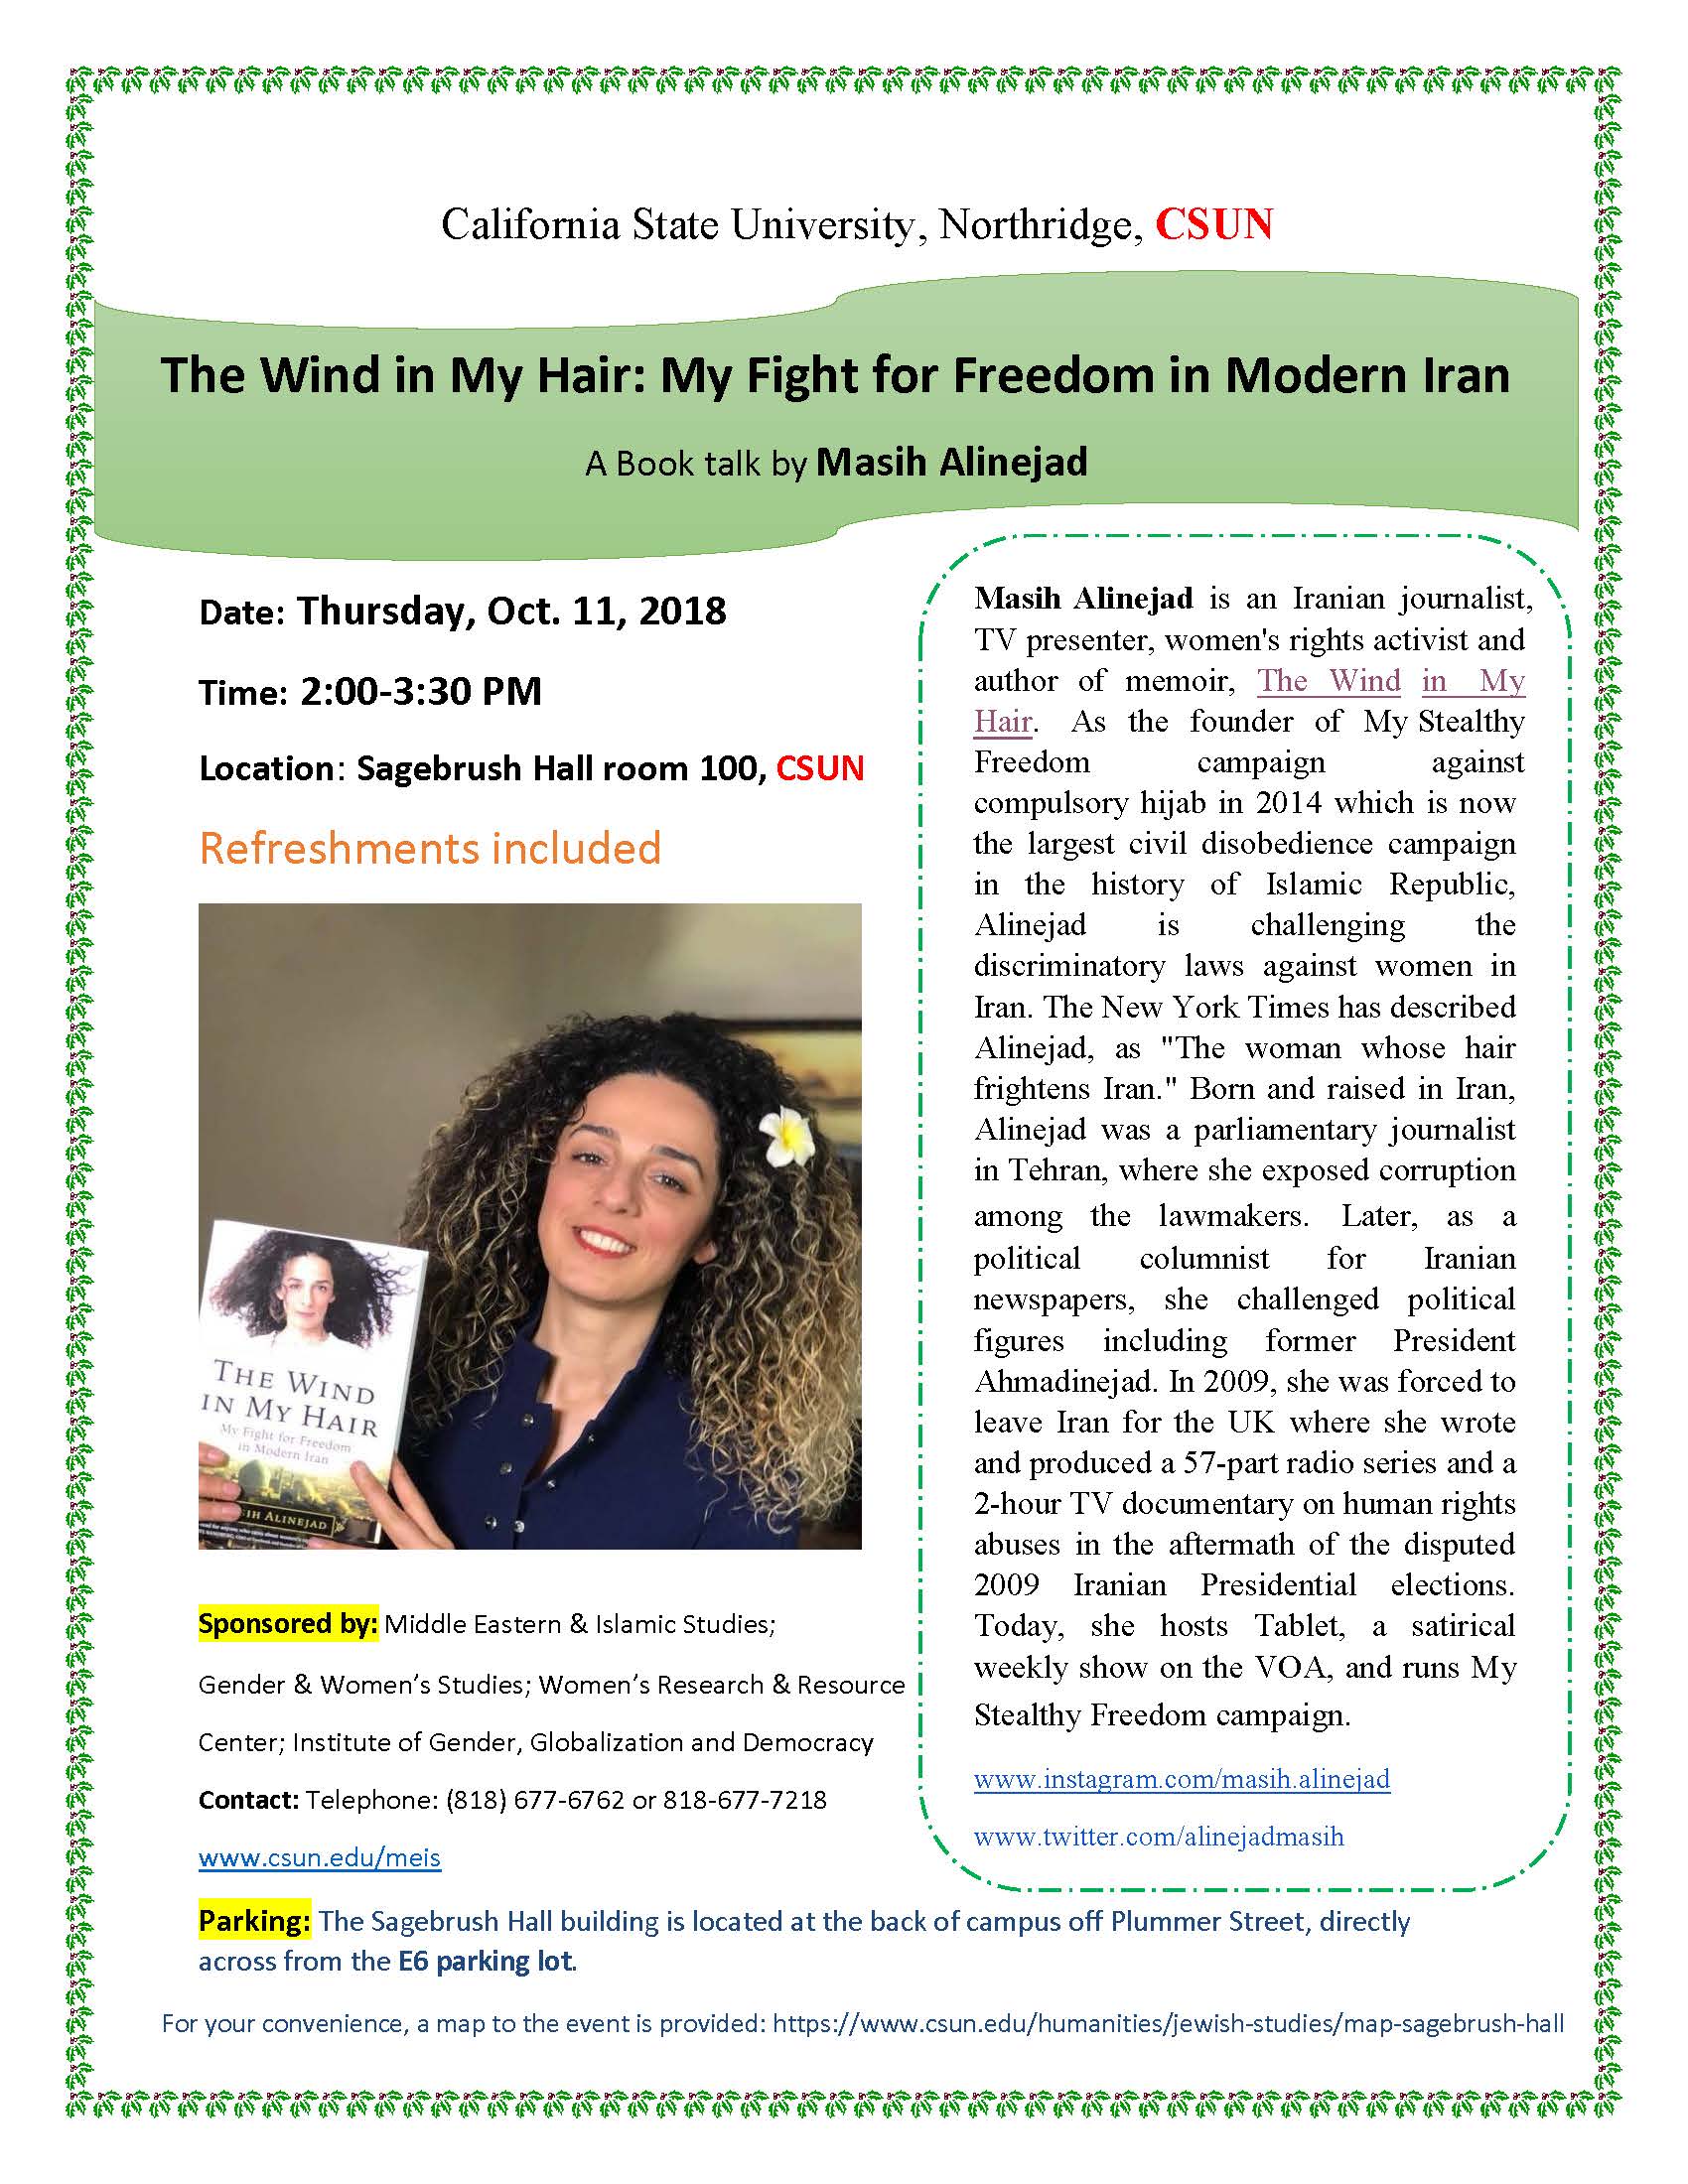 The Wind in My Hair: My Fight for Freedom Modern - A Book Talk by Masih Alinejad | California State University, Northridge